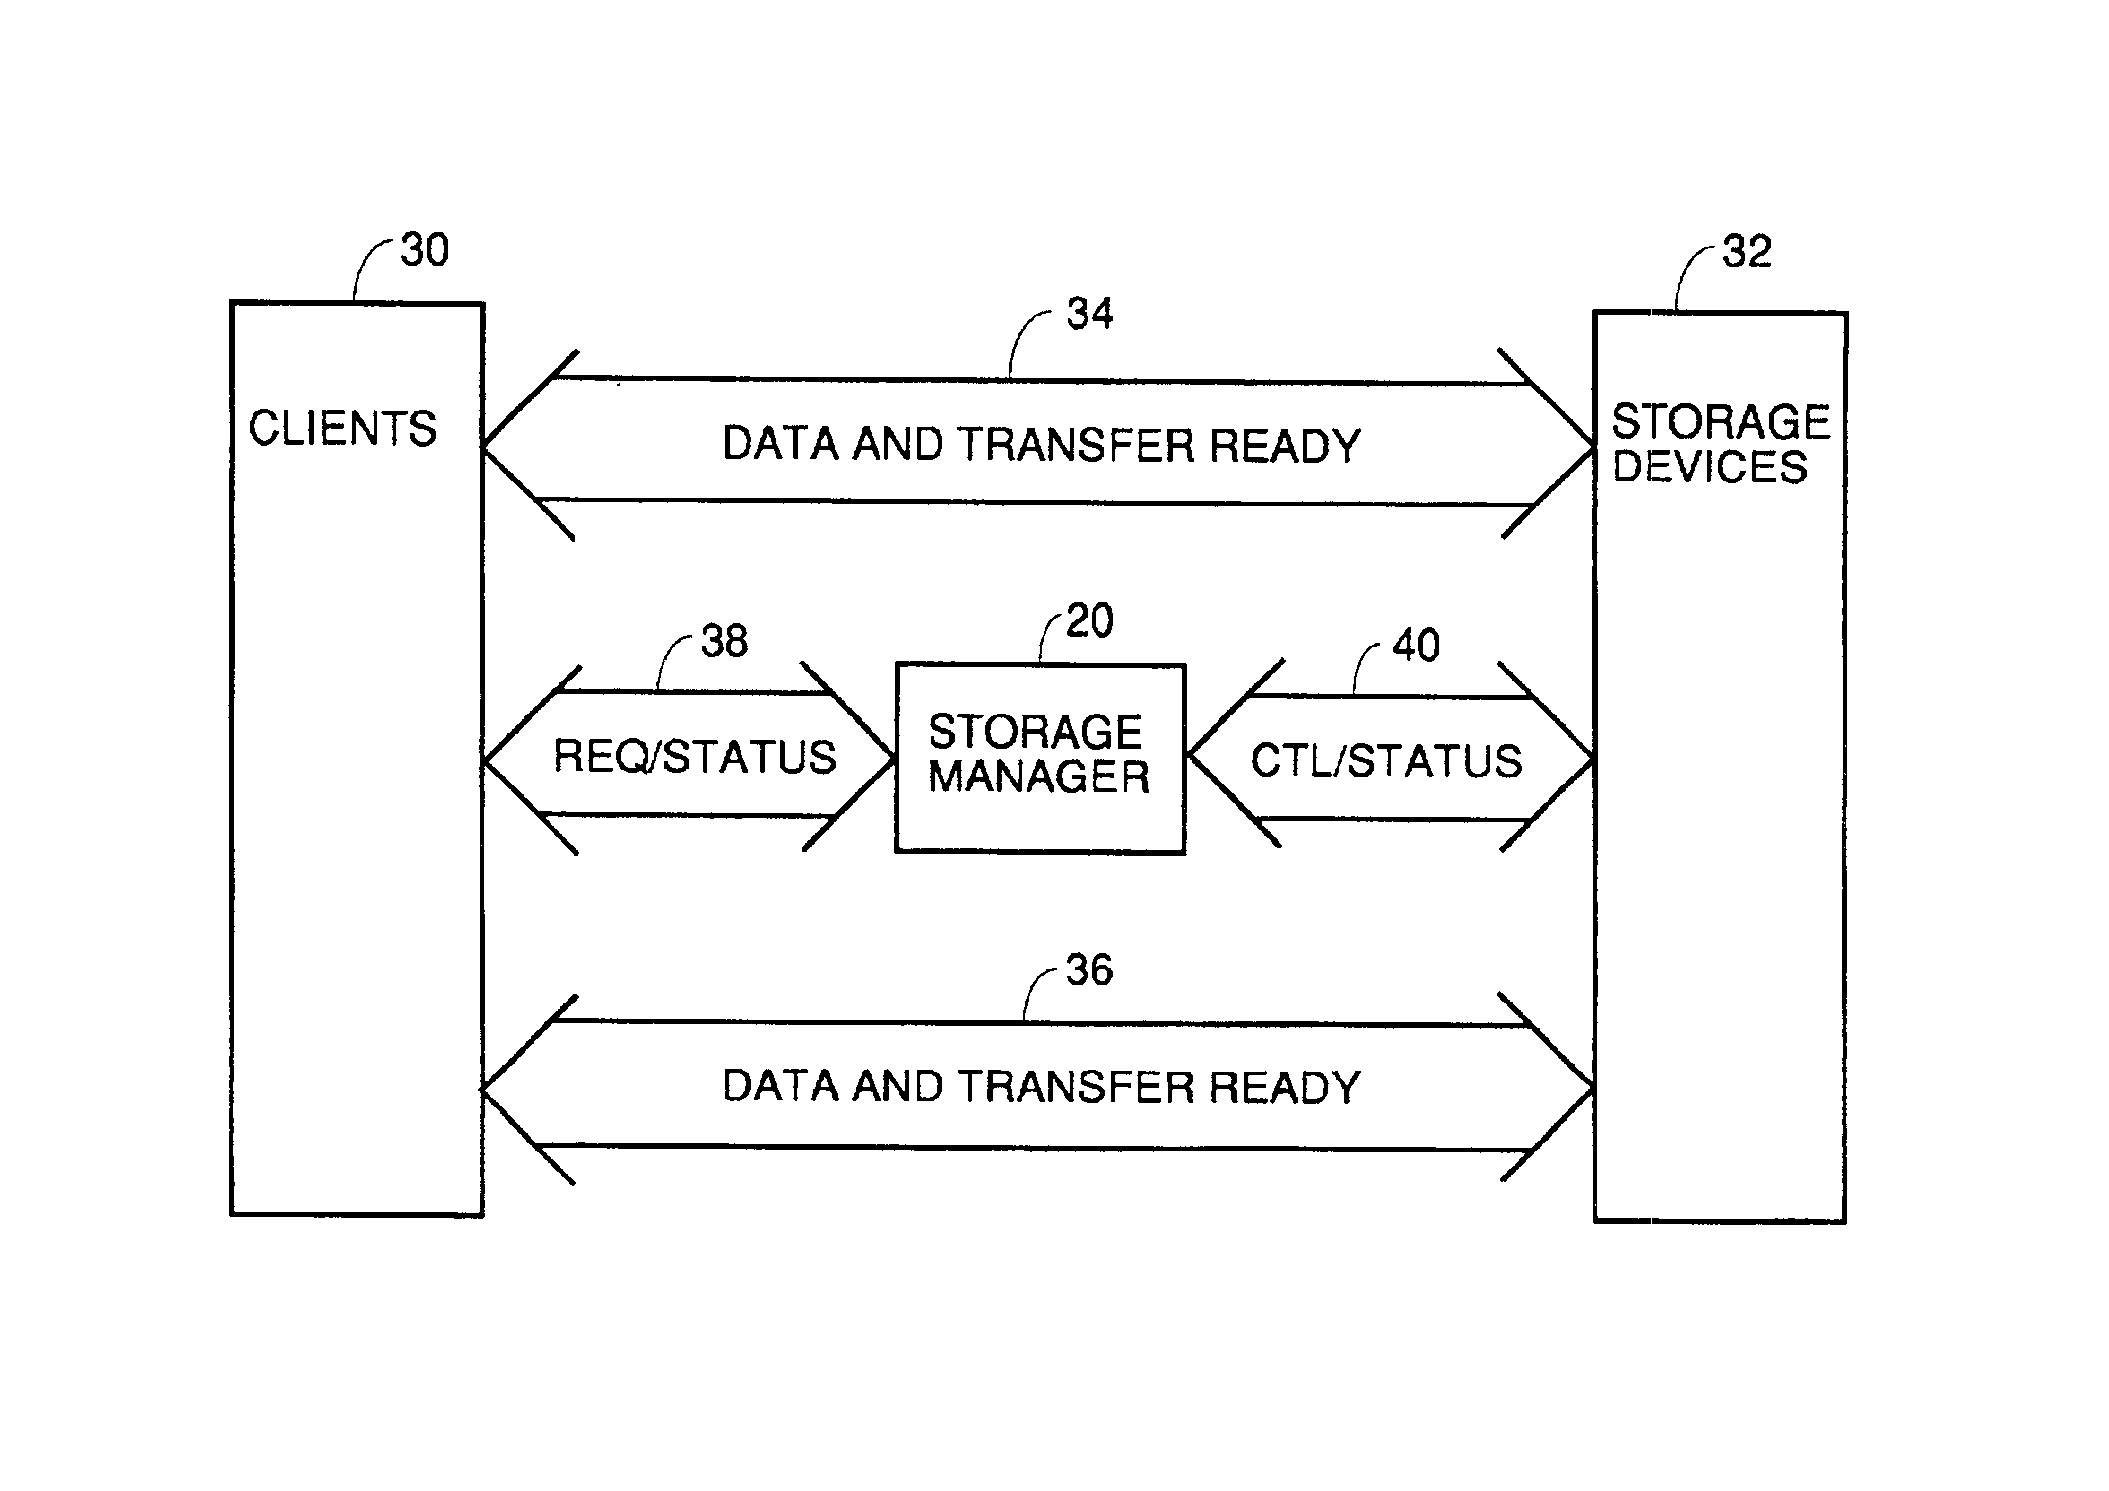 Switch assisted frame aliasing for storage virtualization